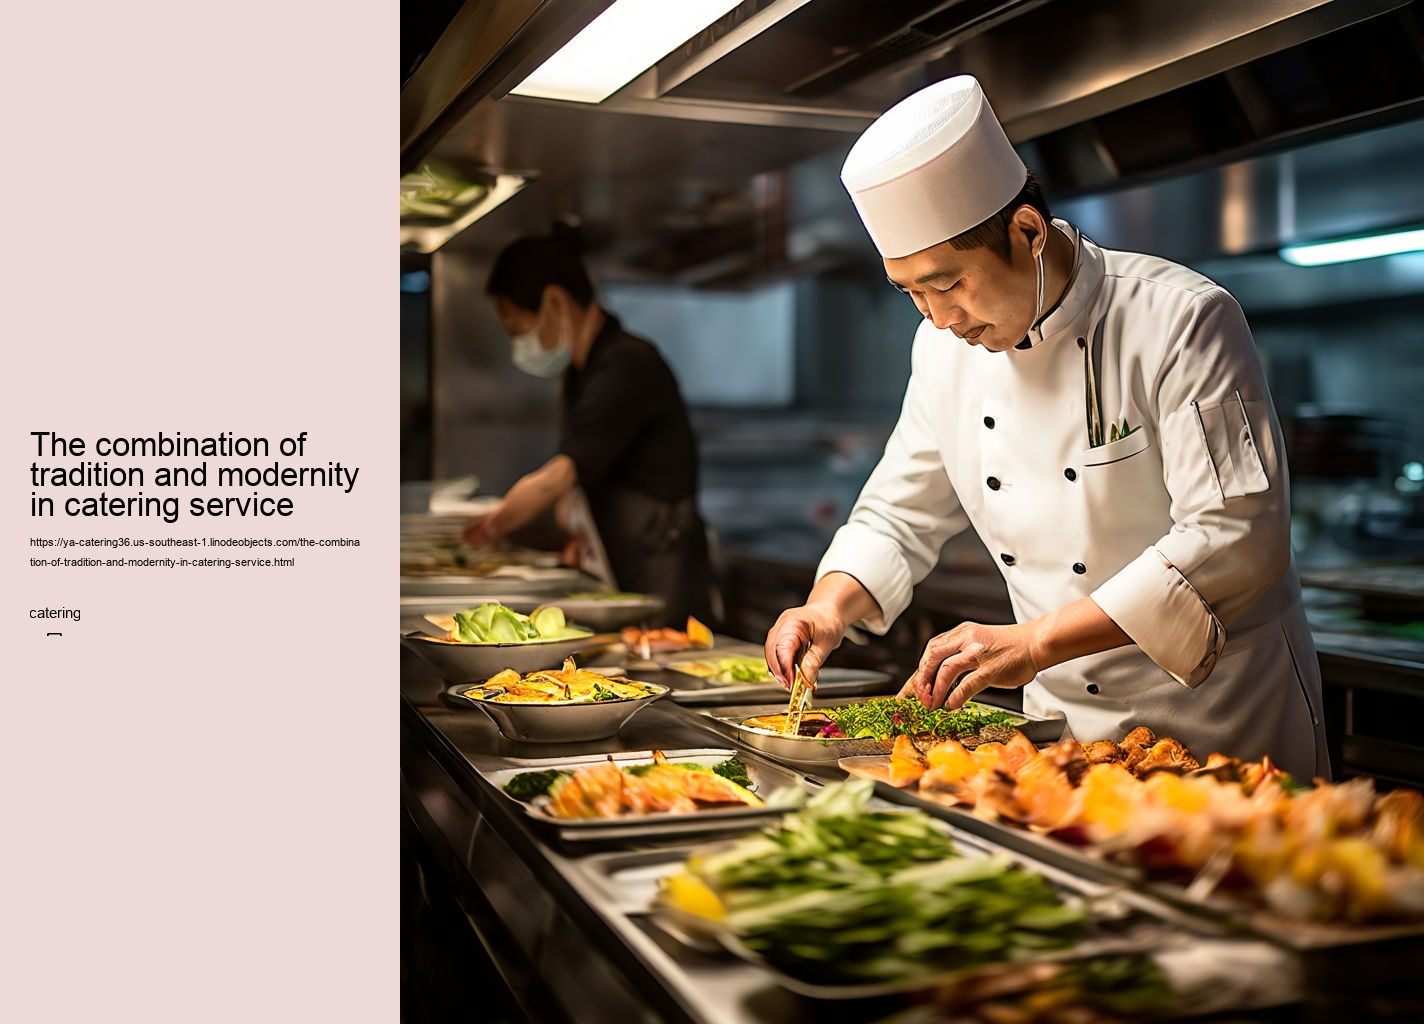 The combination of tradition and modernity in catering service